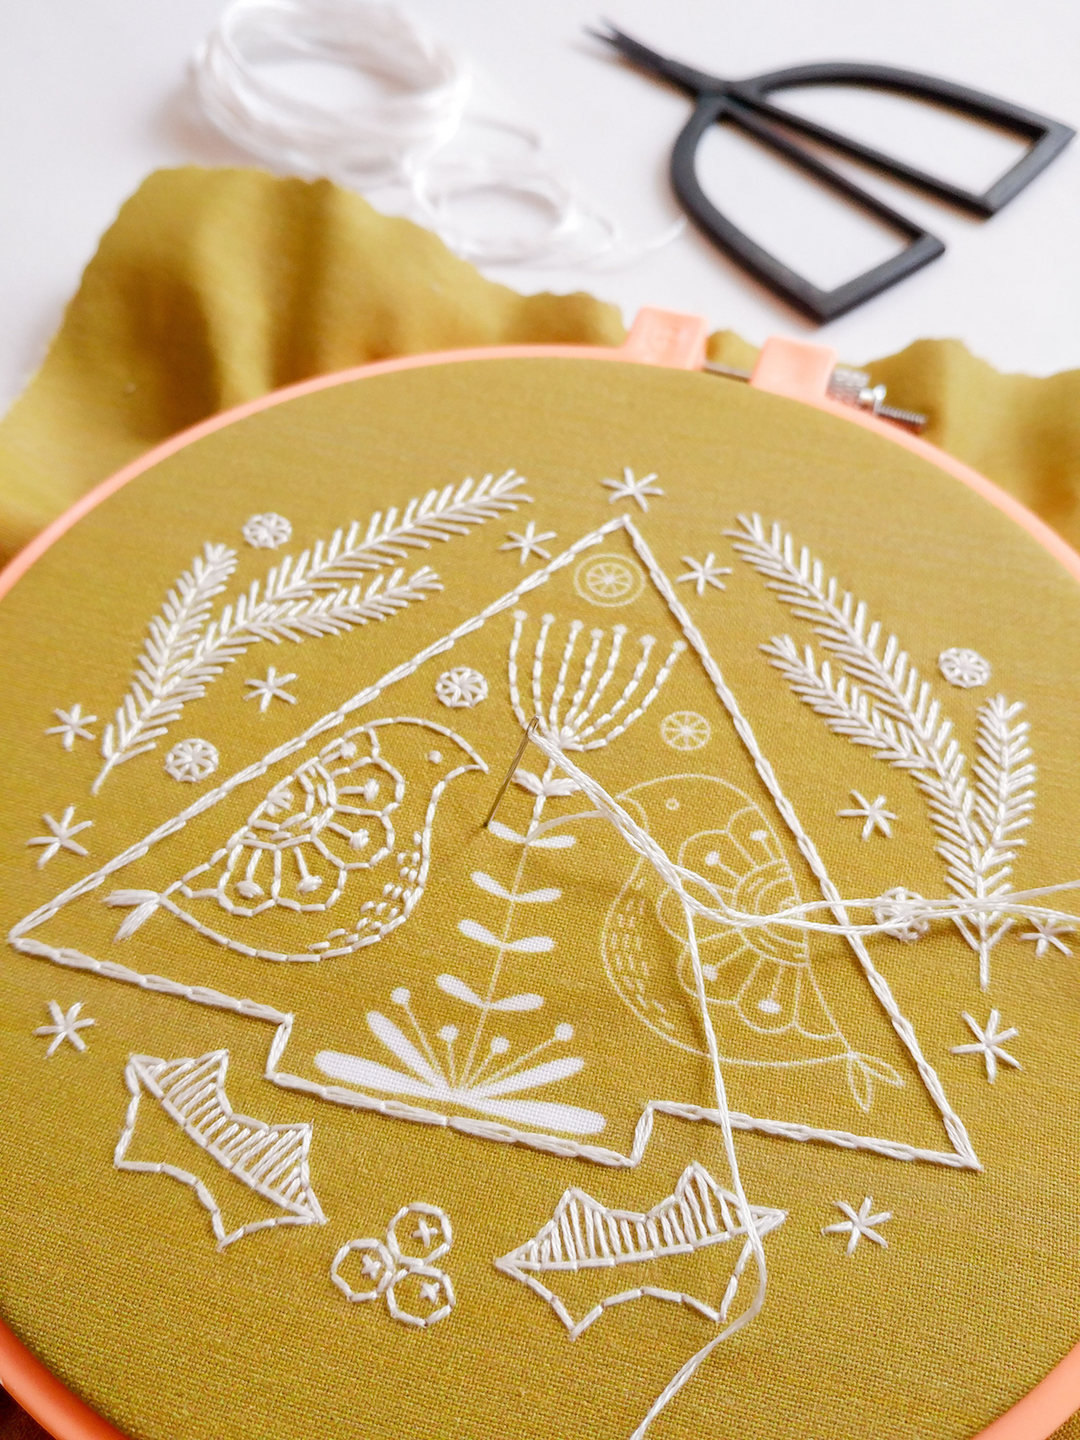 How To Make Embroidery Patterns